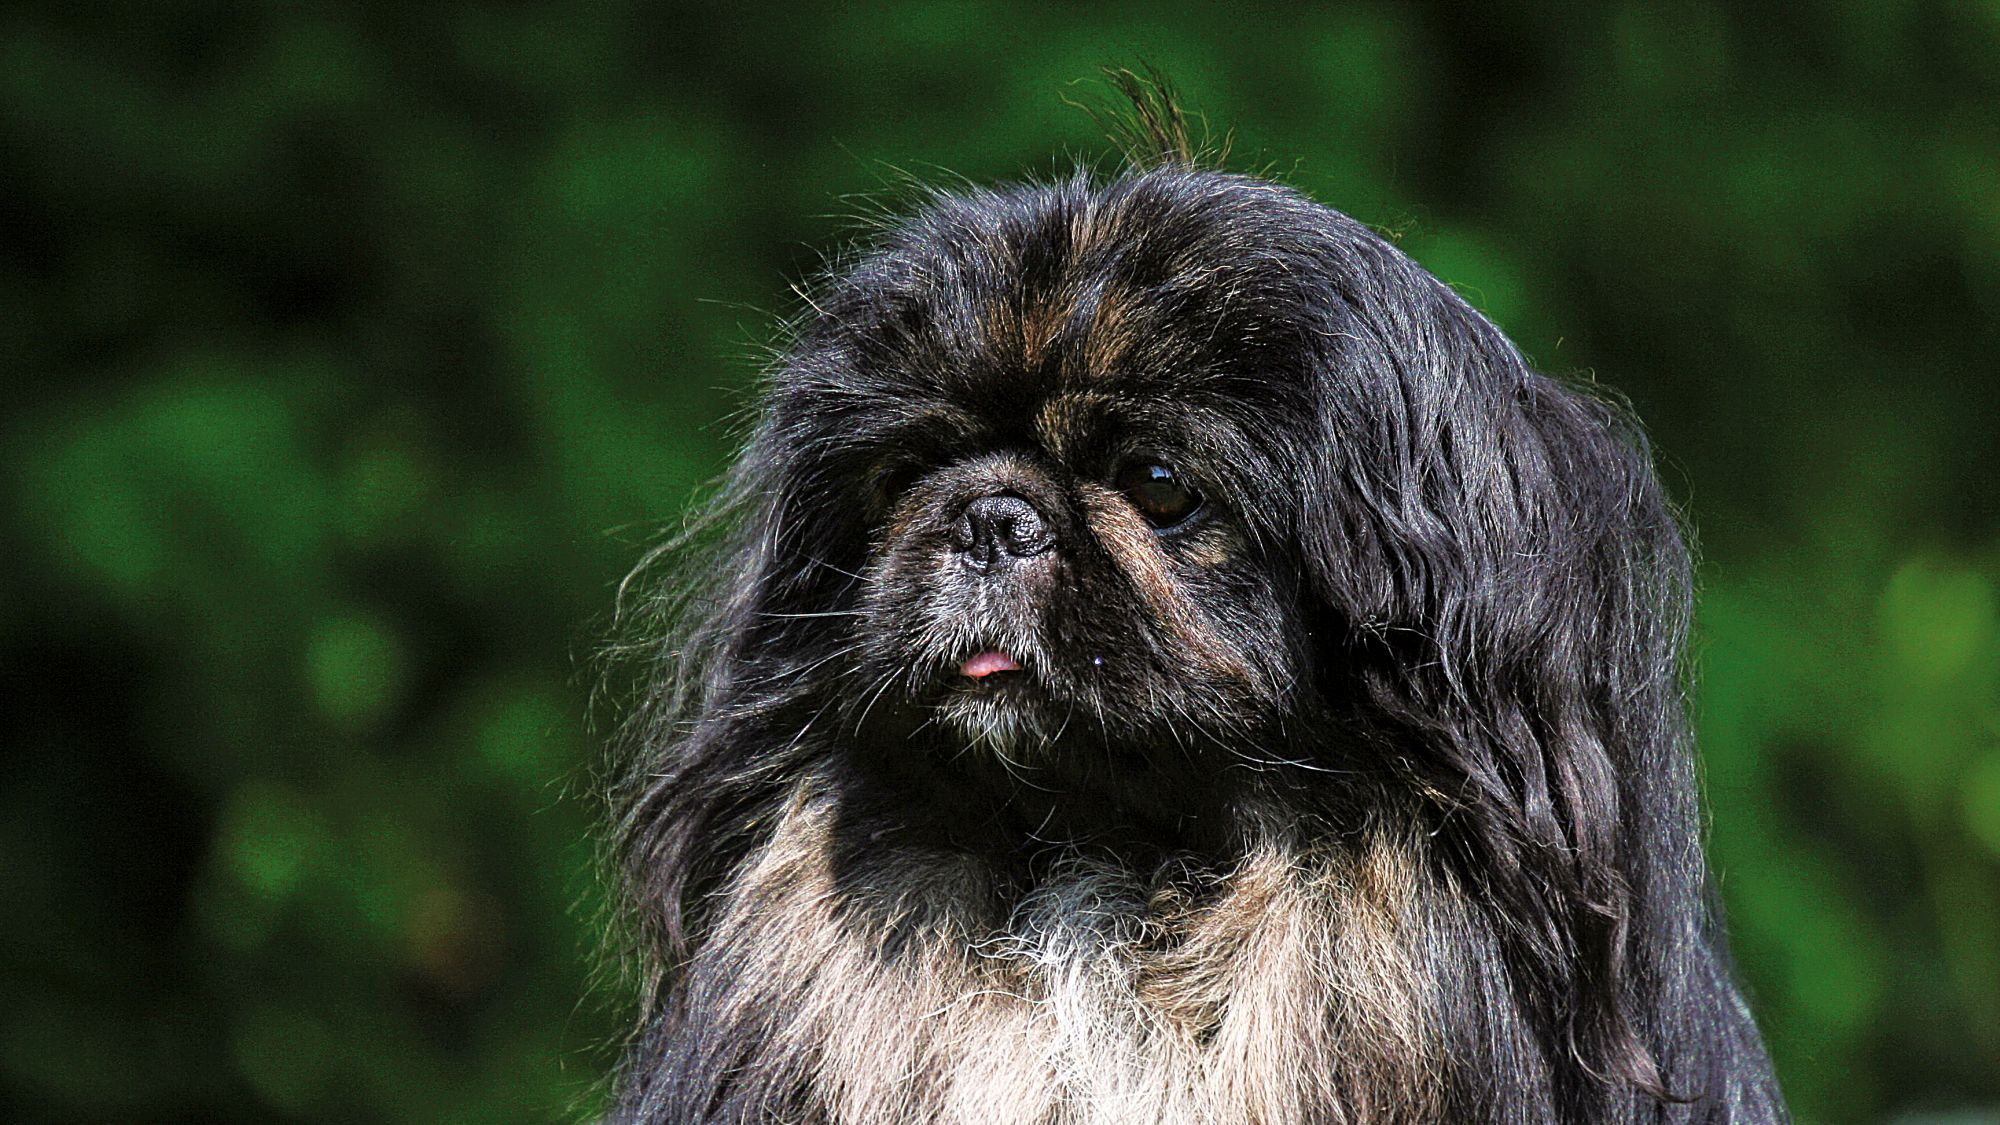 A black Pekinese dog looking into the distance